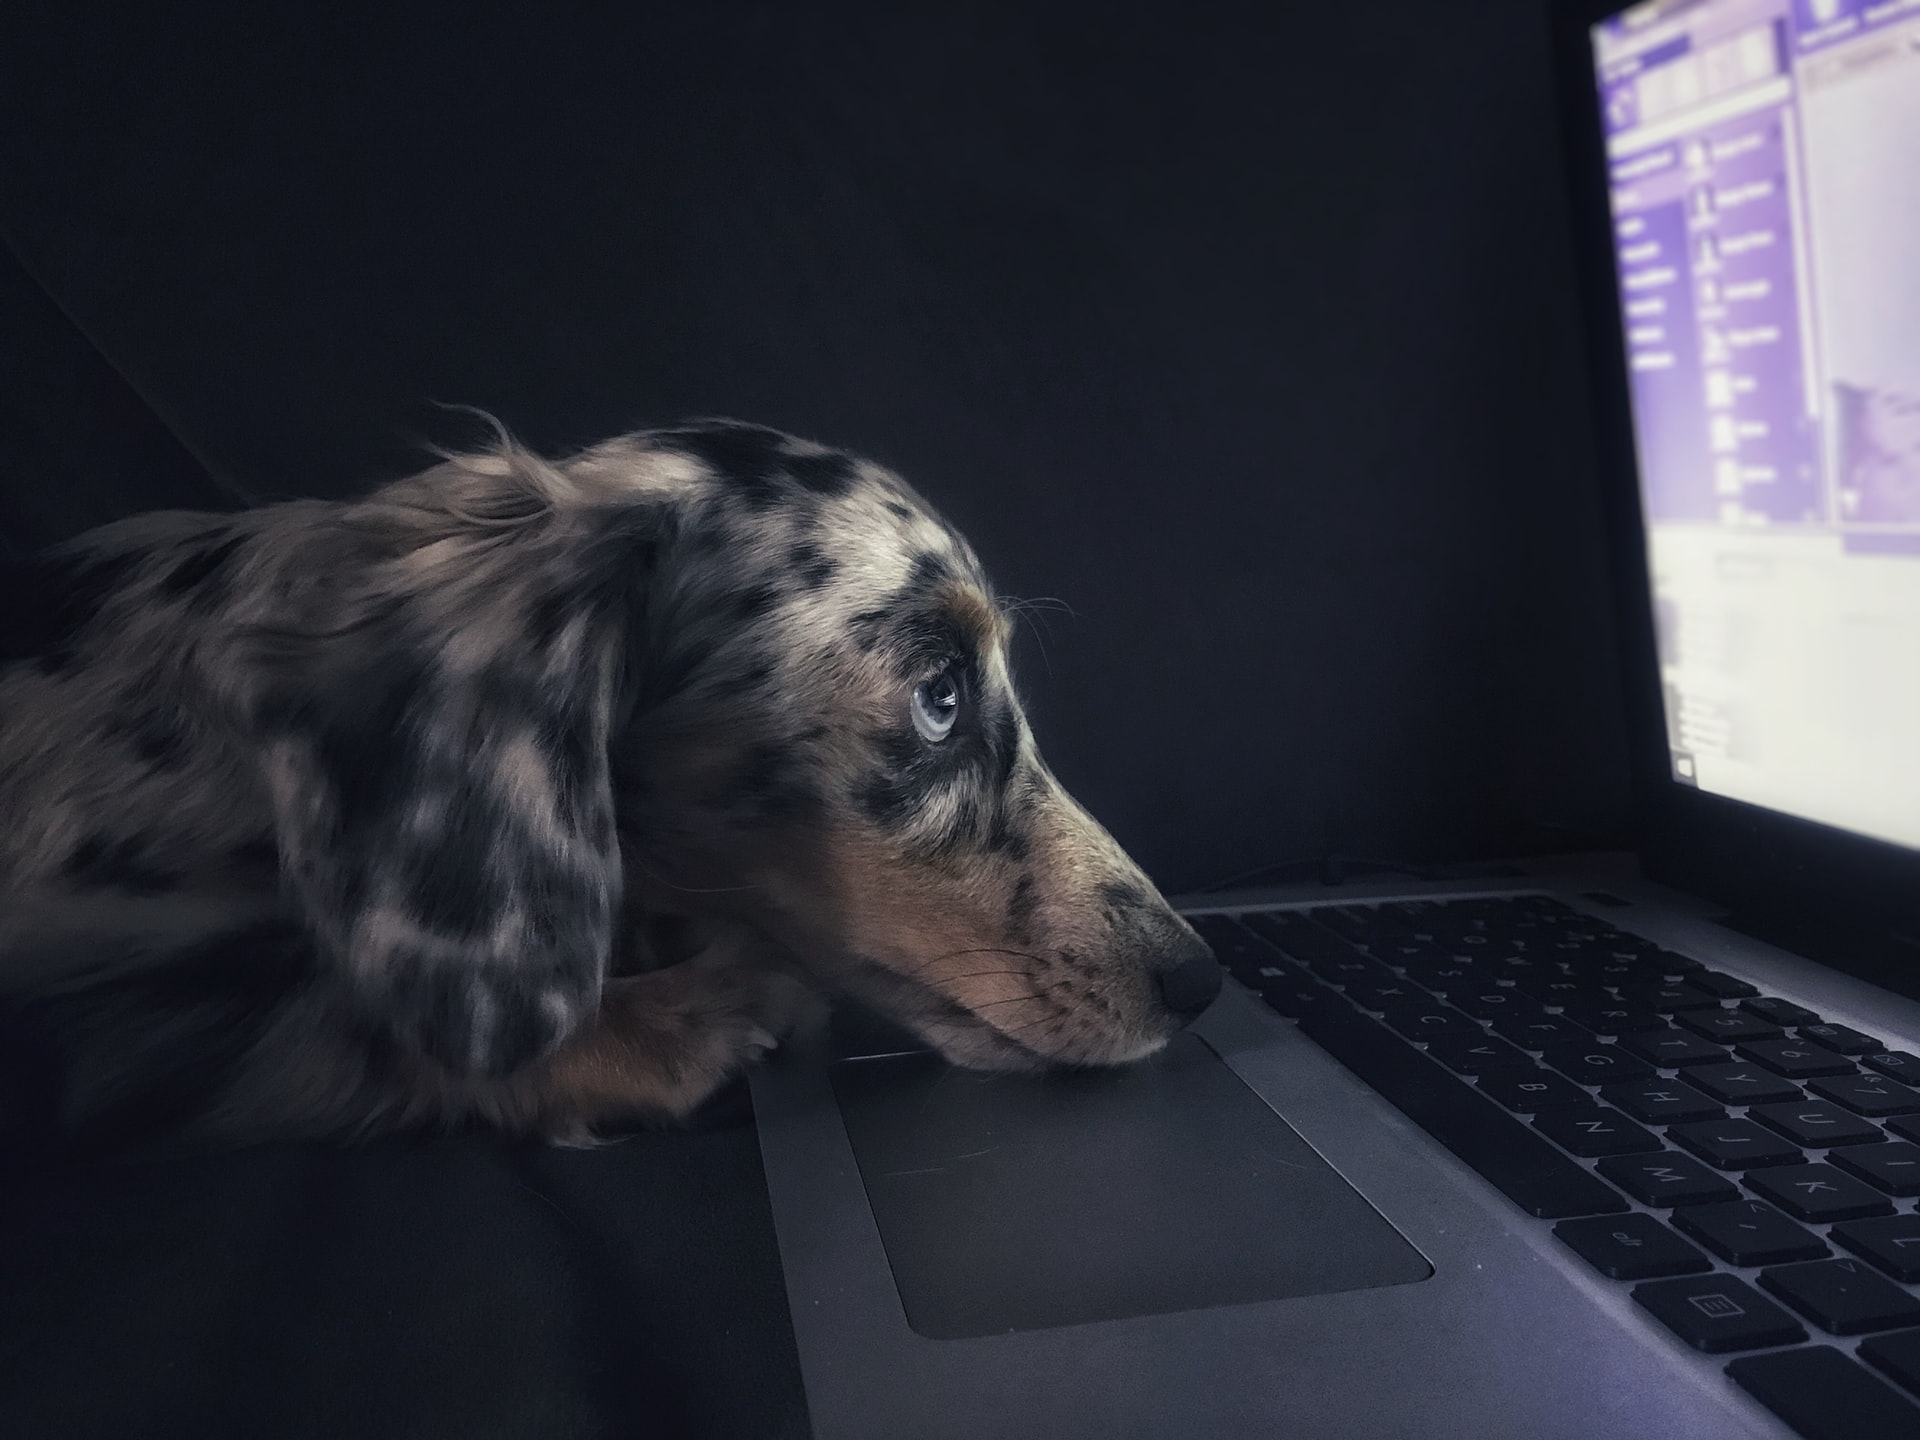 Dog in front of laptop